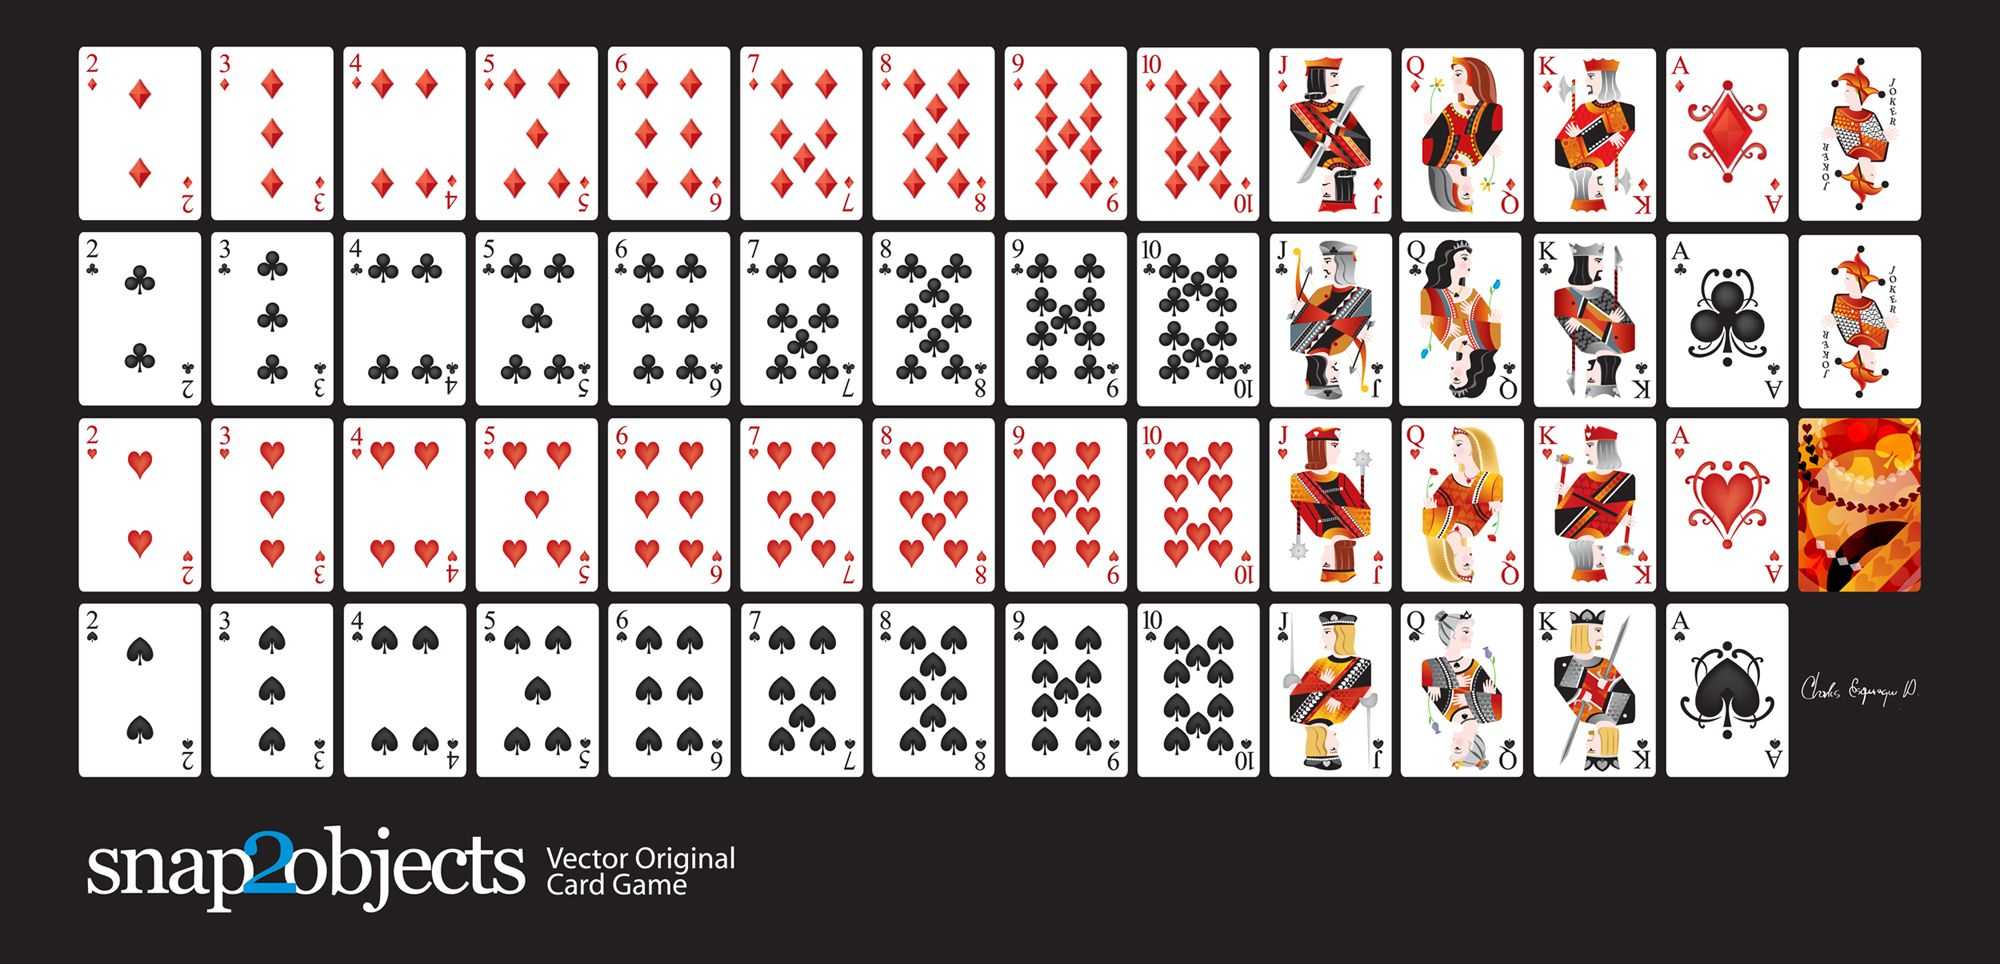 Free Vector Card Deck | Printable Playing Cards, Cards, Card Inside Free Printable Playing Cards Template